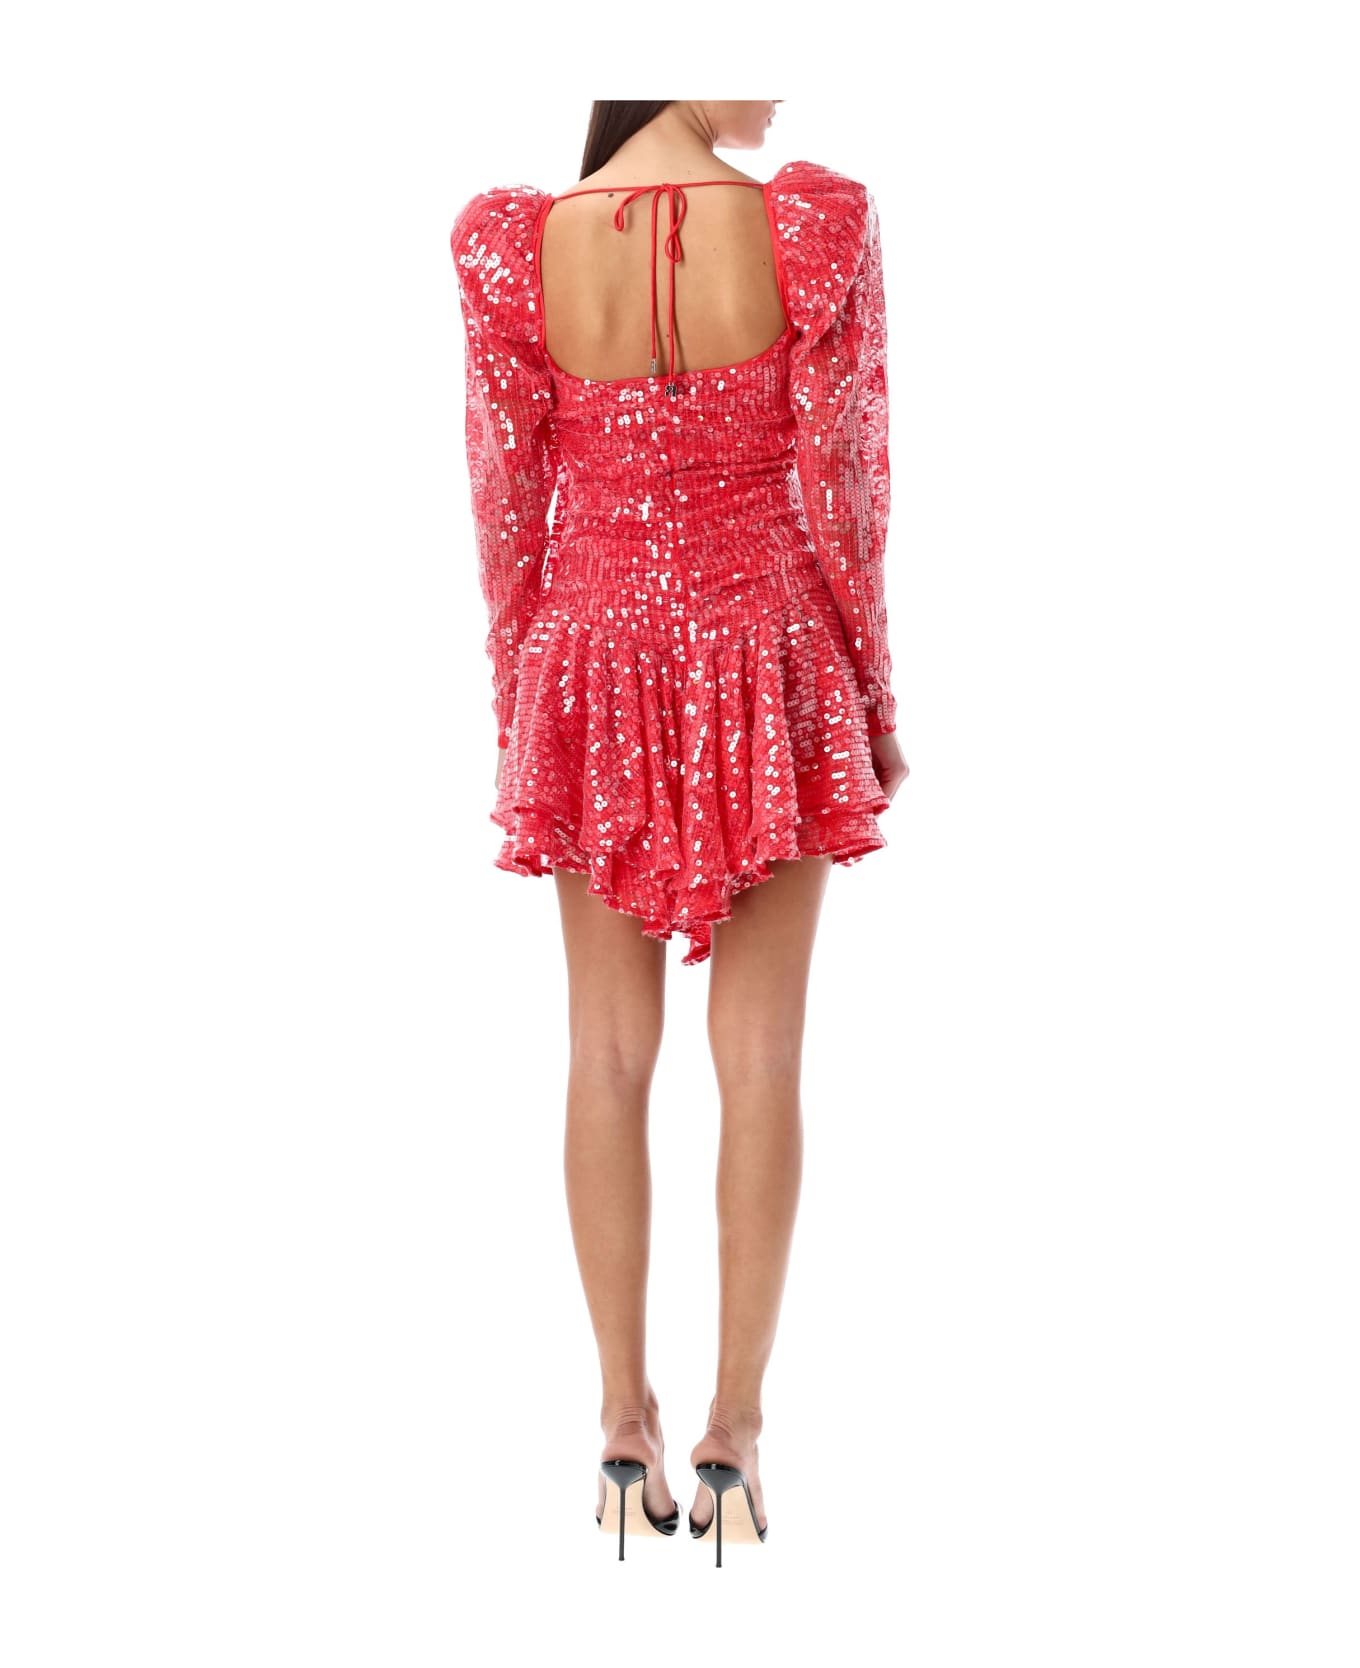 Rotate by Birger Christensen Mini Dress Lace Sequin - POPPY RED